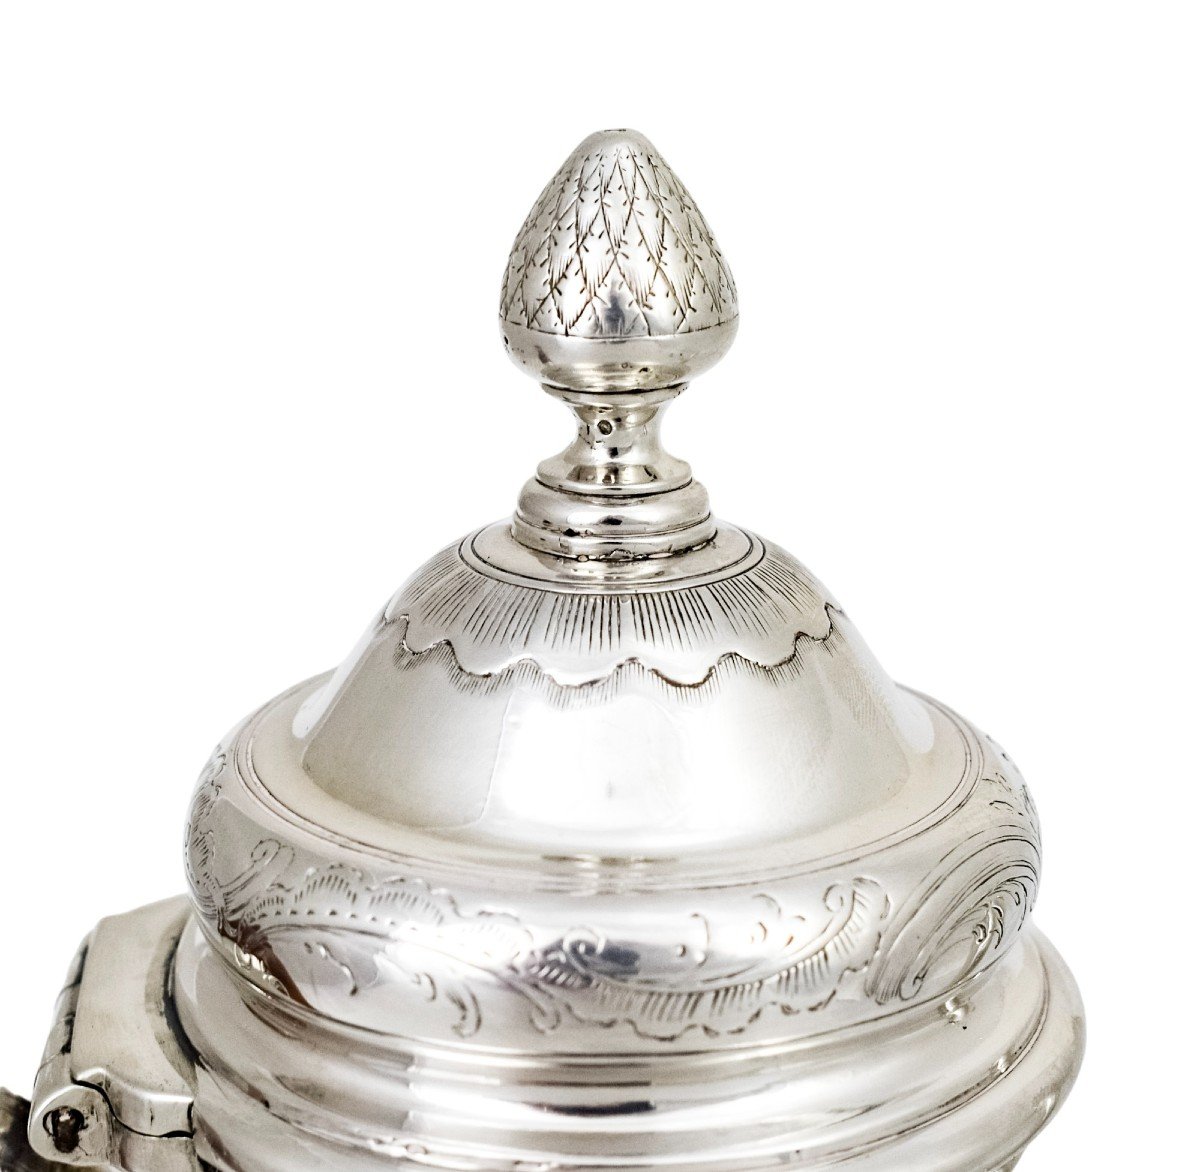 Antique 1740s George II Rococo Sterling Silver Rocaille Coffeepot With Aristocratic Armorials-photo-2